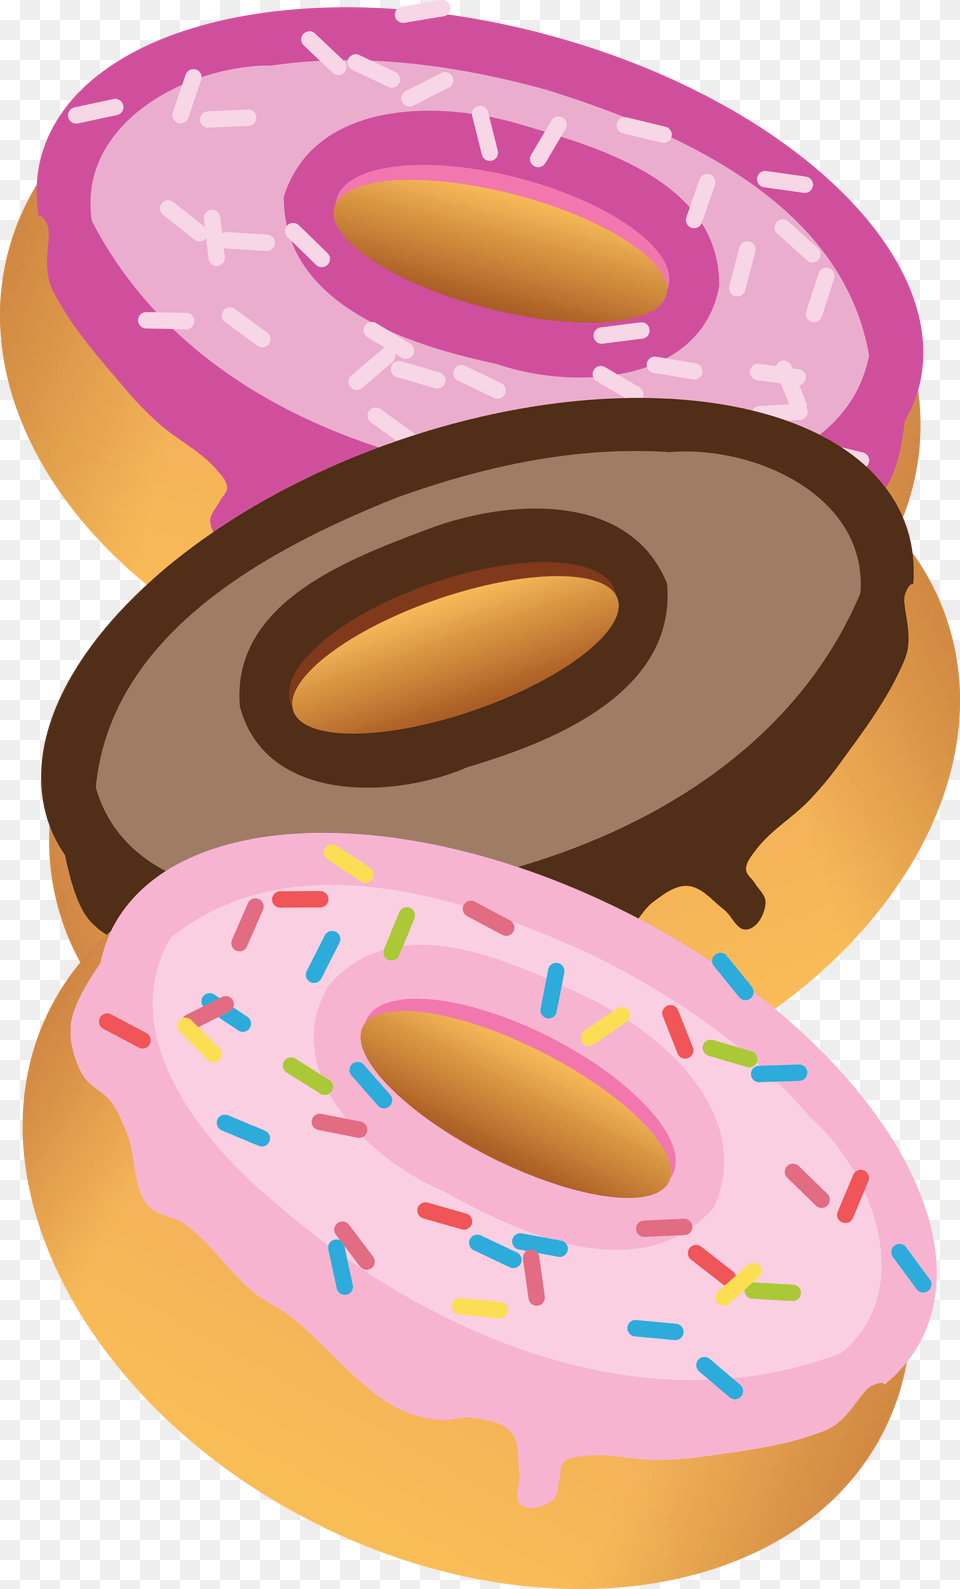 Jpg Eps Ai Svg Cdr Donut Invitation Template, Food, Sweets, Birthday Cake, Cake Free Png